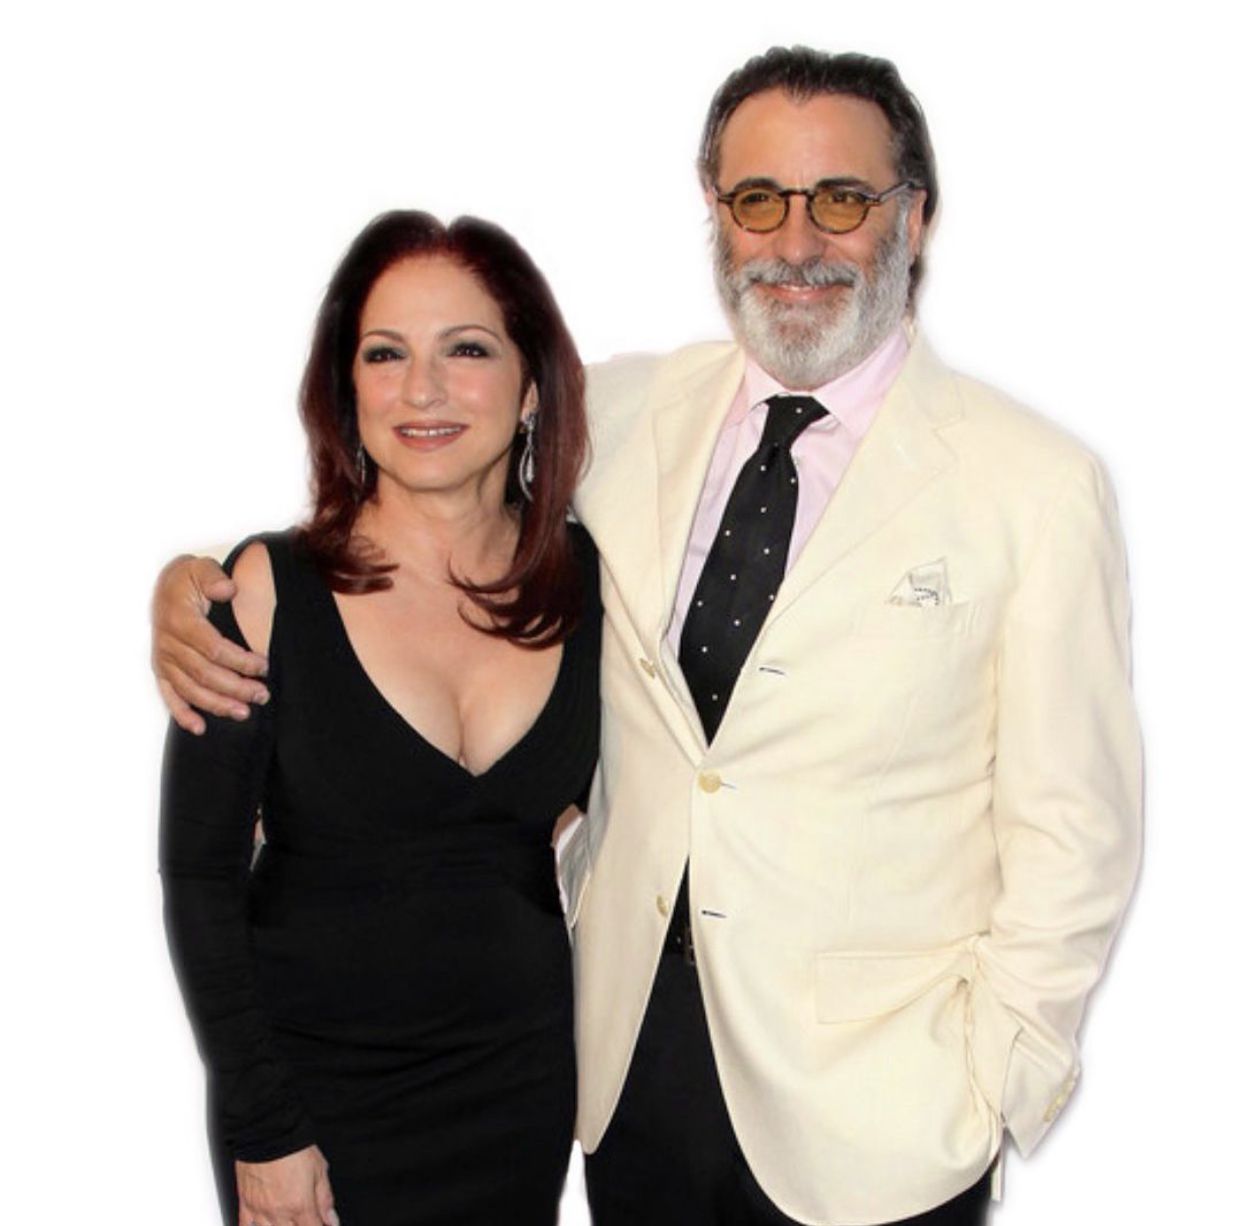 Gloria Estefan and Andy Garcia "Father of the Bride" remake